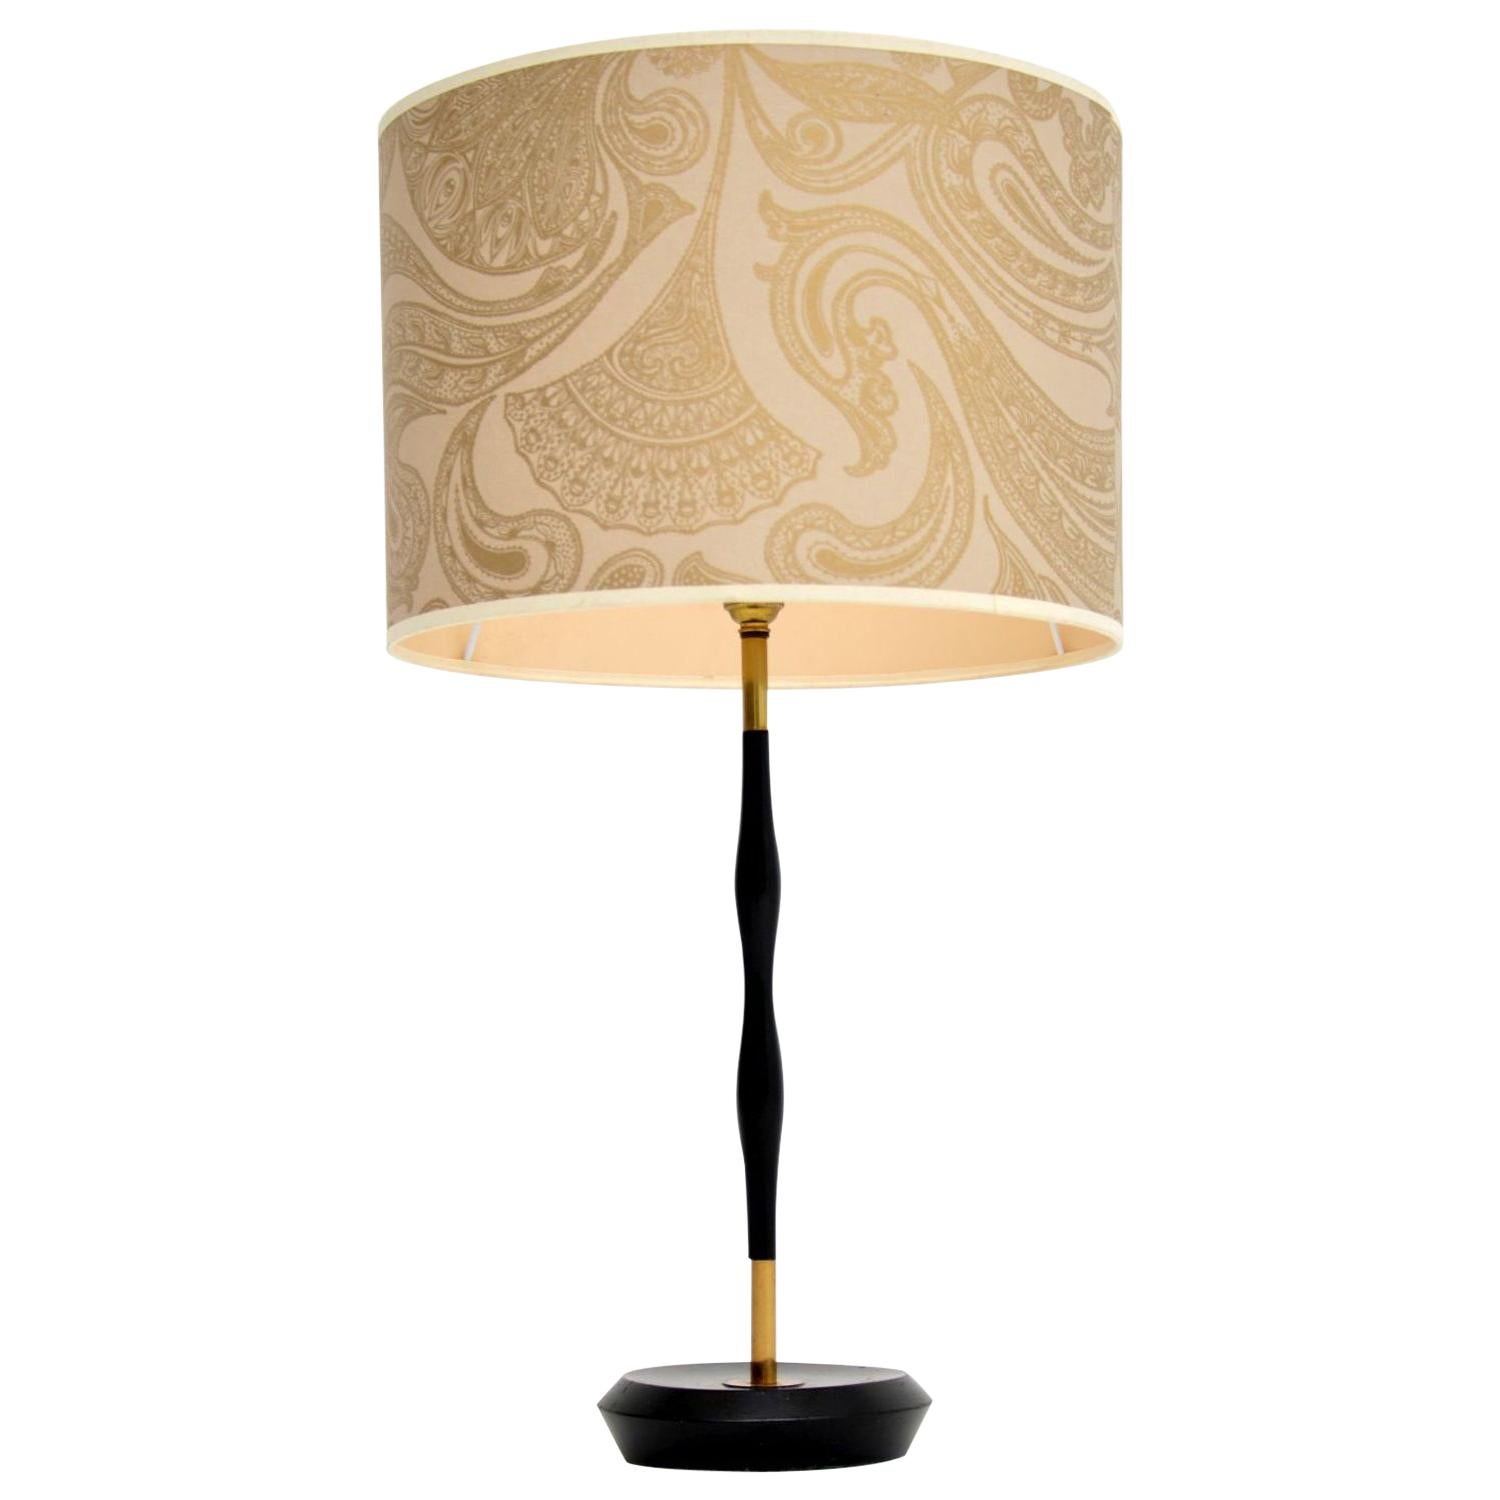 1960s Vintage Ebonized Wood and Brass Table Lamp